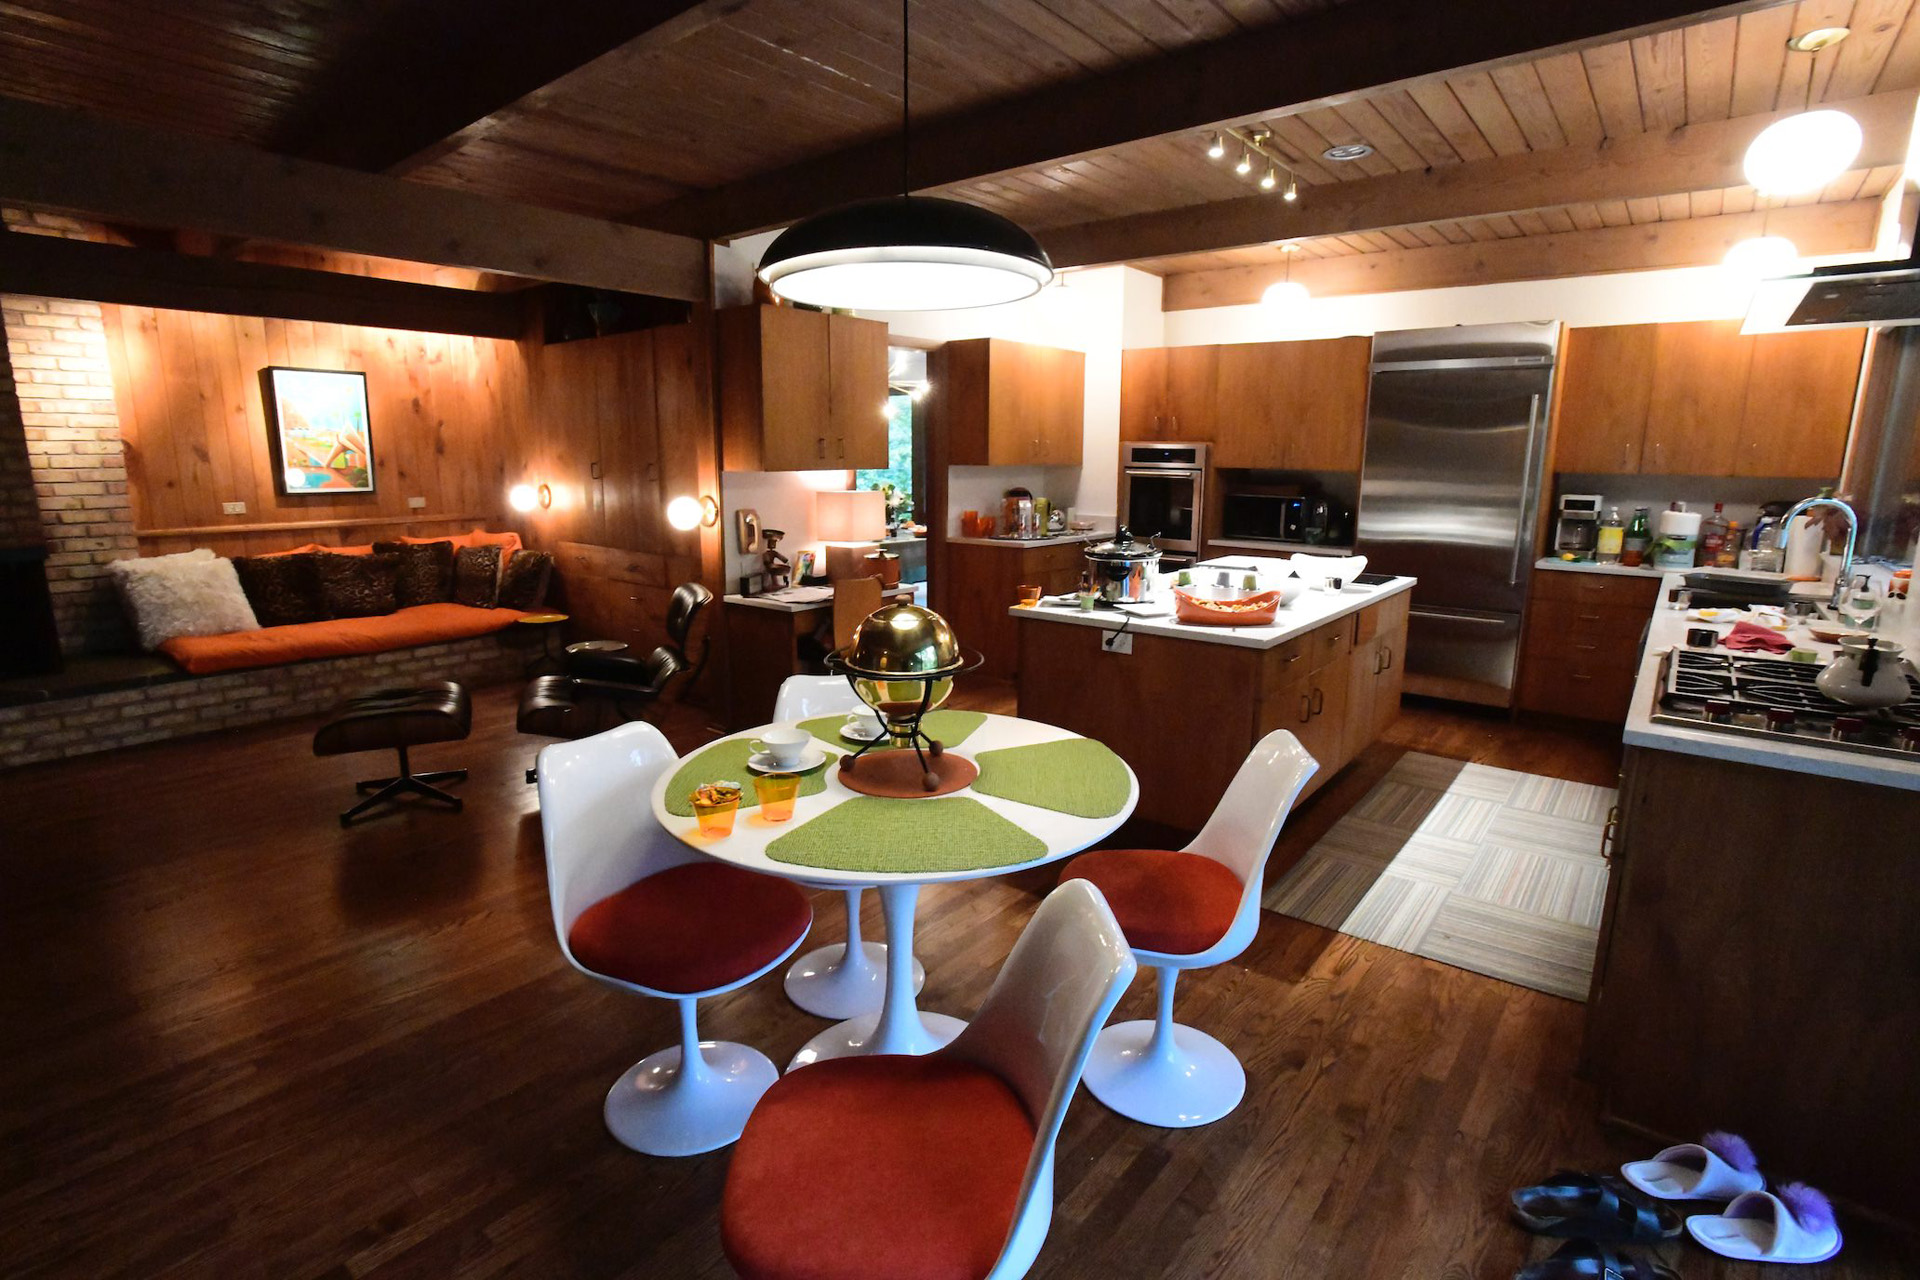 What a fantastic open kitchen / dinette / family room!